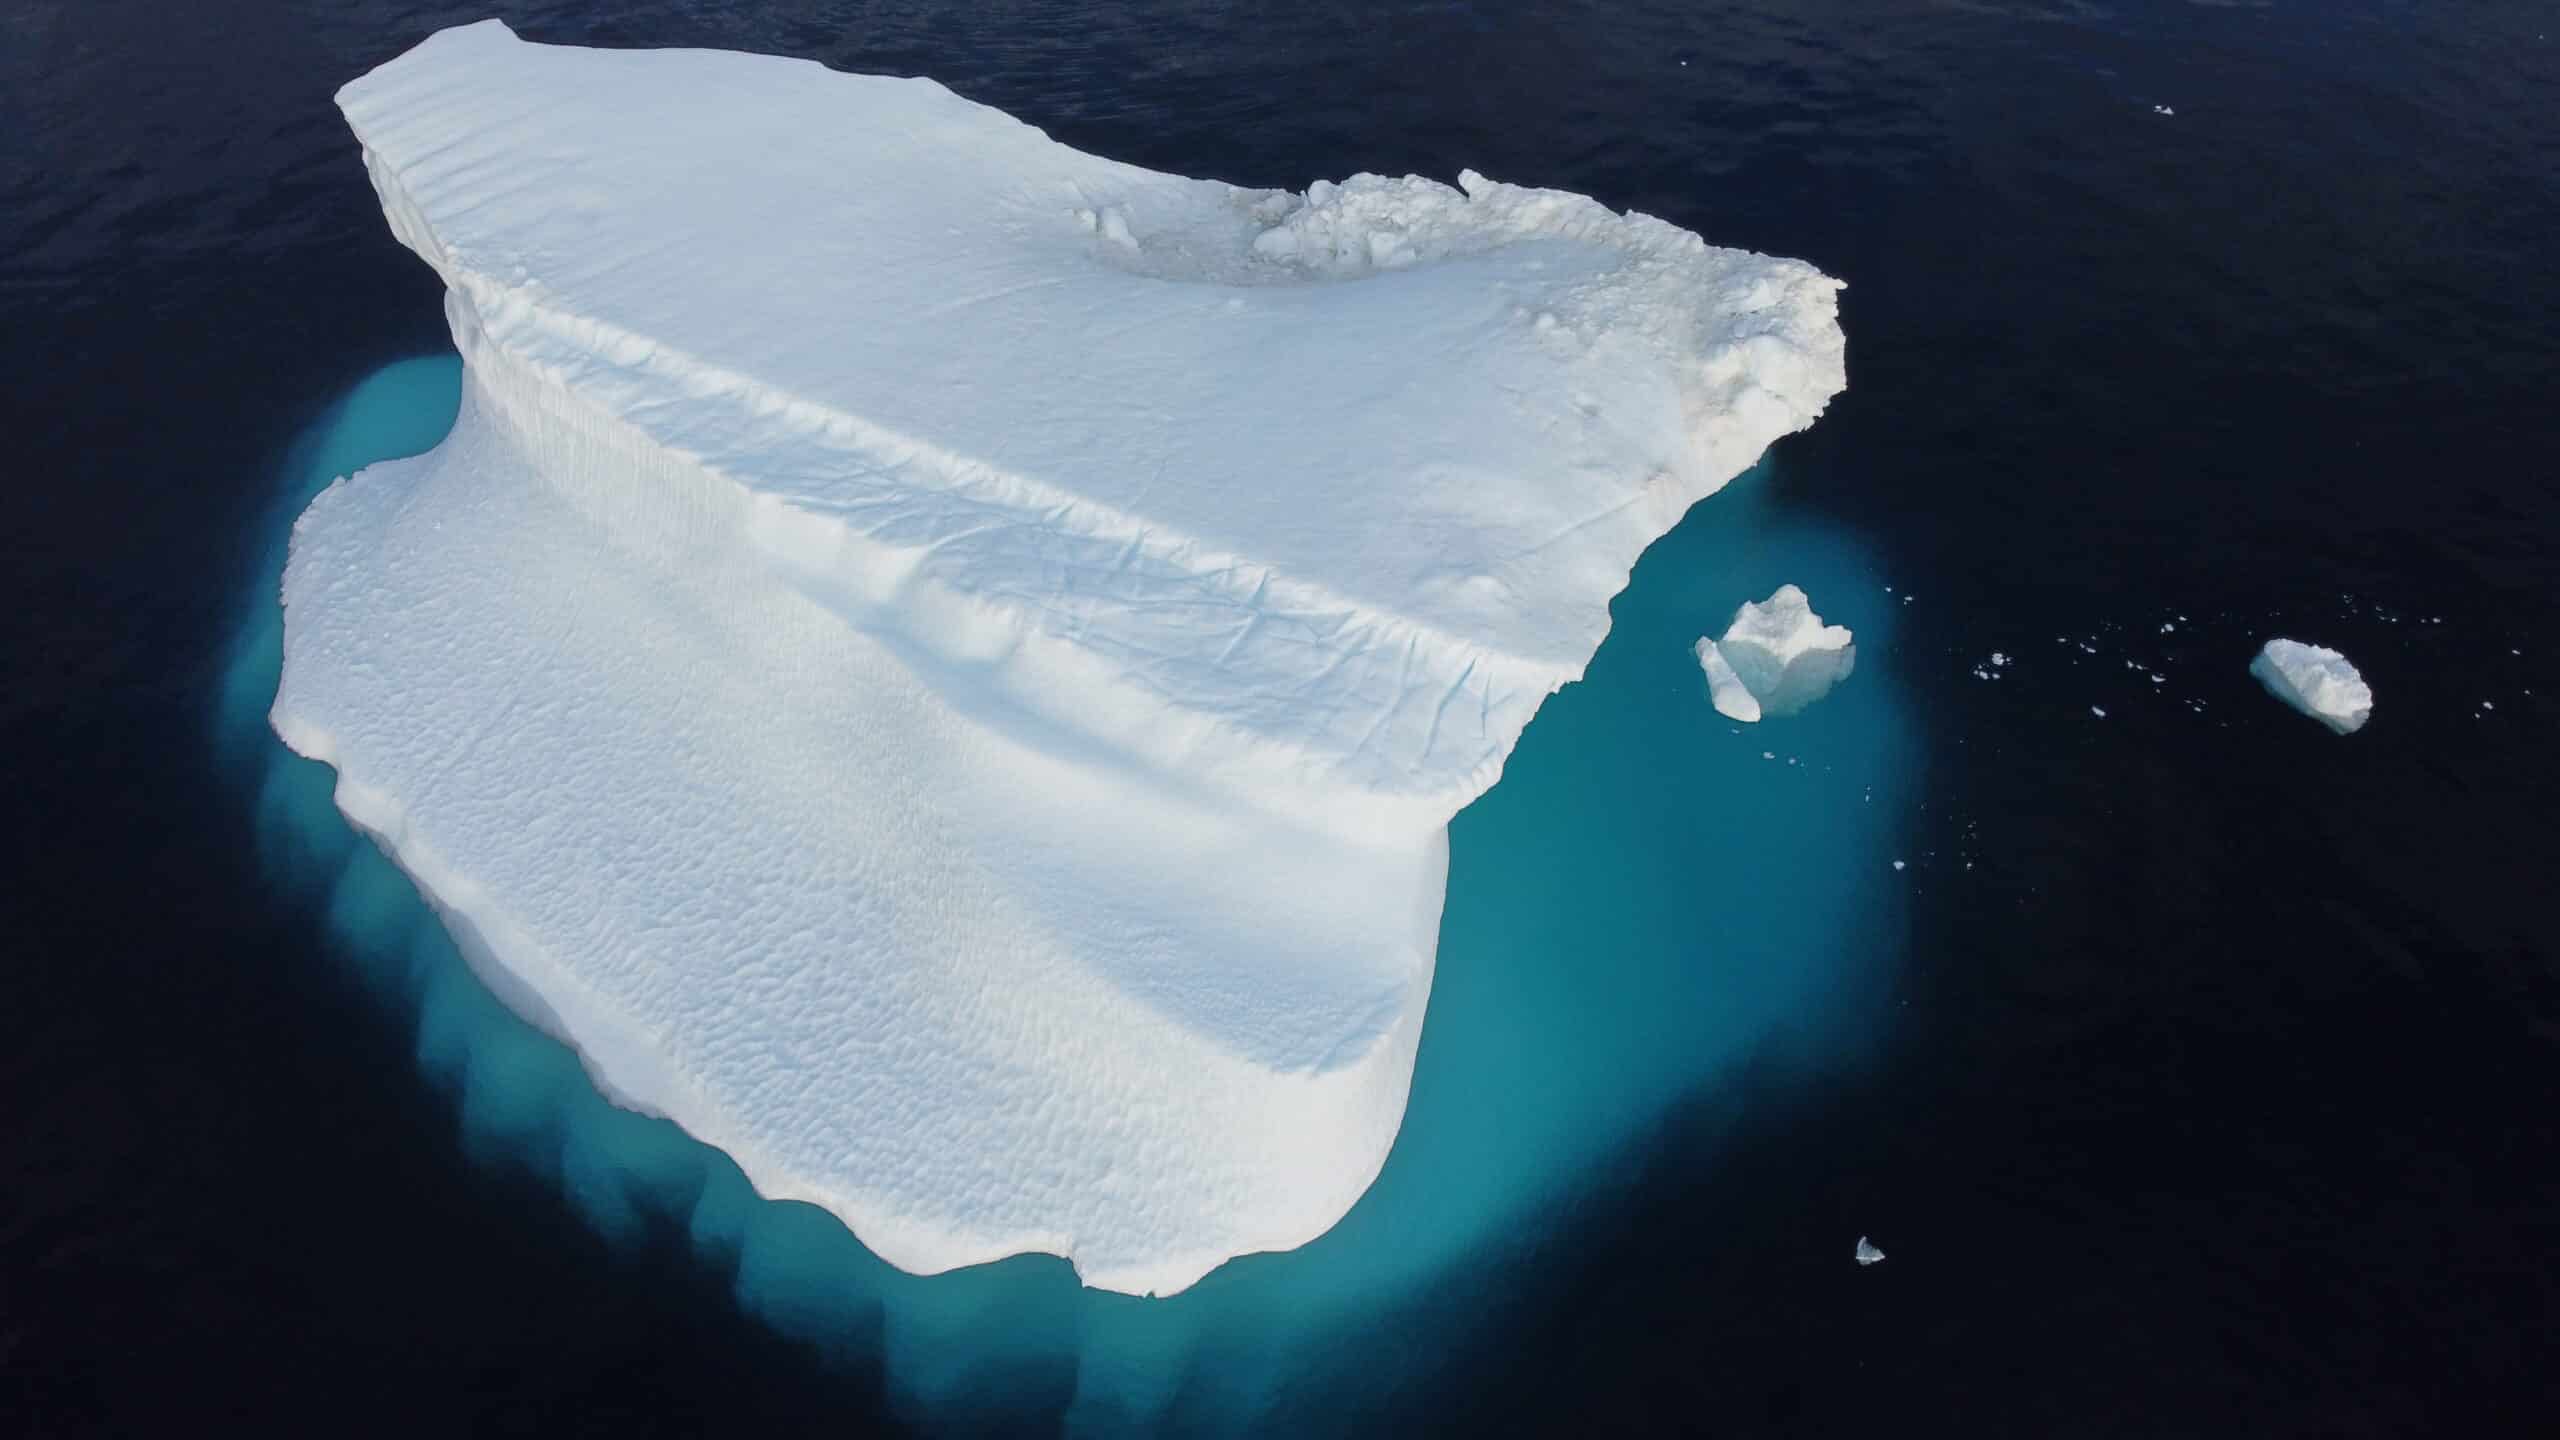 A white iceberg surrounded by dark water. The ice below the surface appears turquoise. 